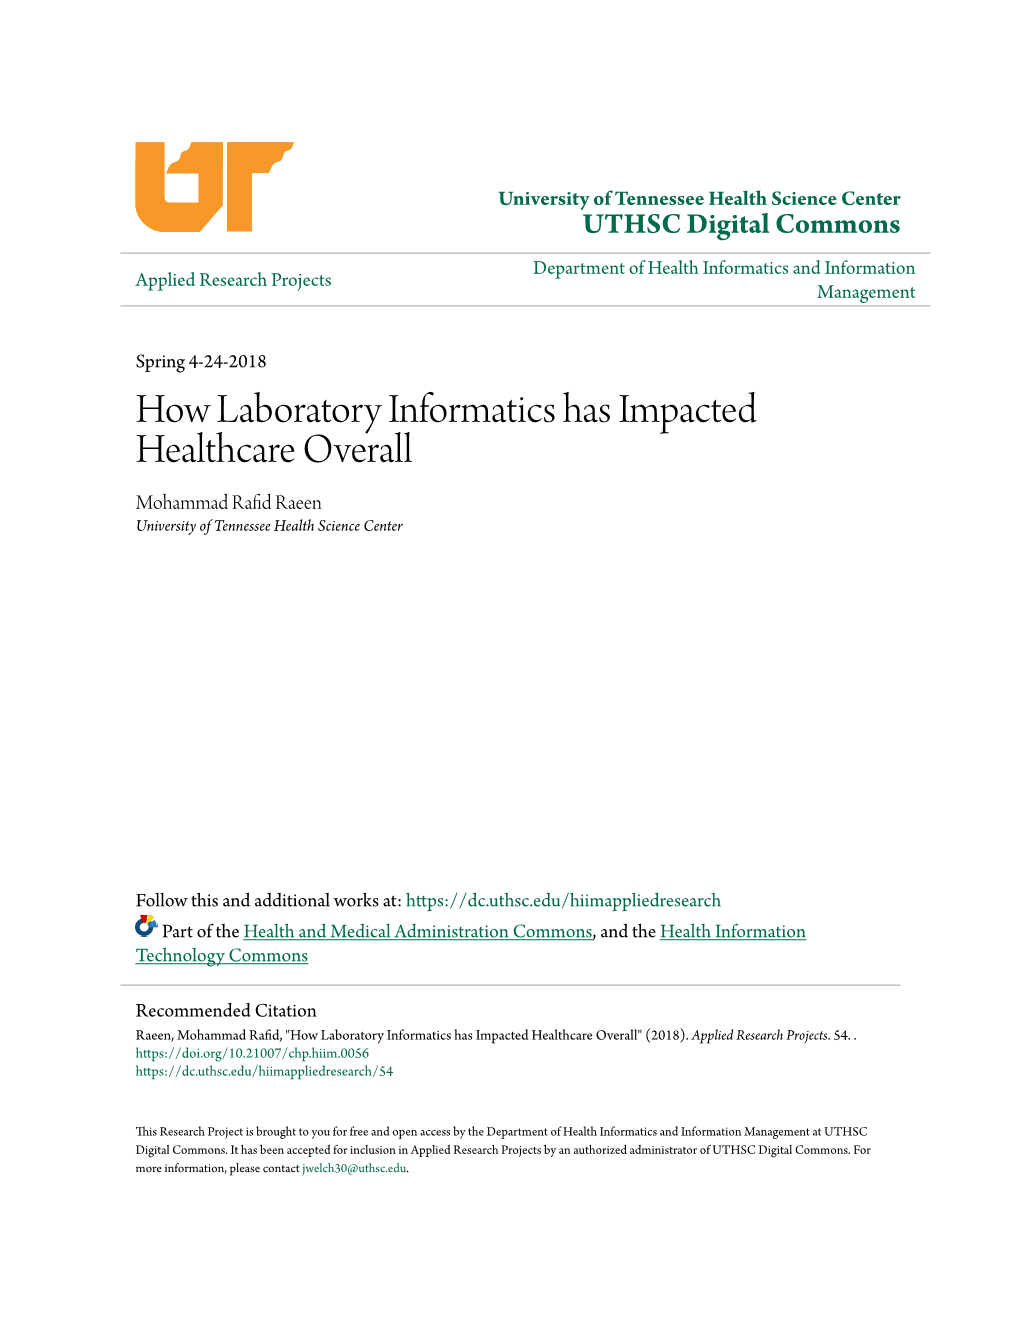 How Laboratory Informatics Has Impacted Healthcare Overall Mohammad Rafid Raeen University of Tennessee Health Science Center